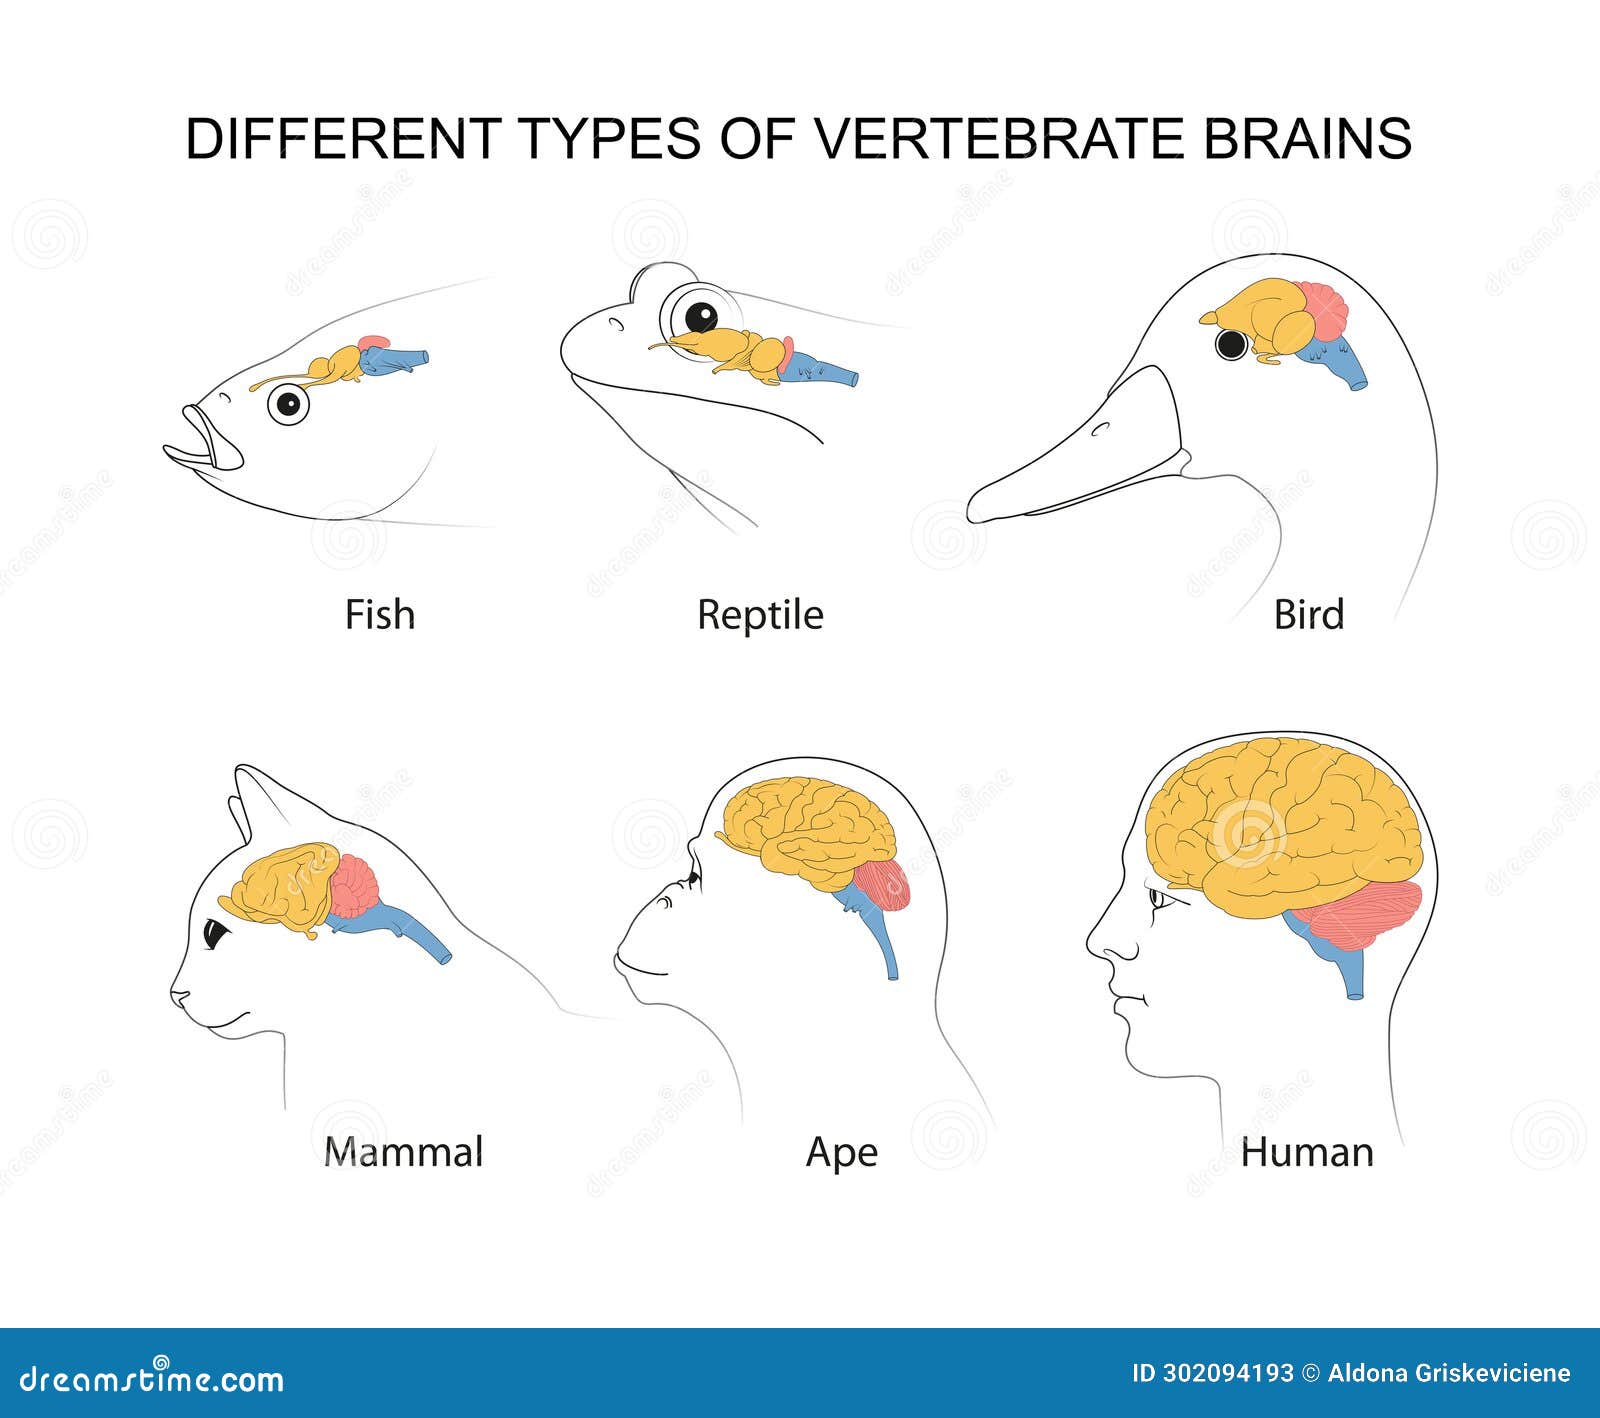 vertebrate brains: evolution, structures and functions